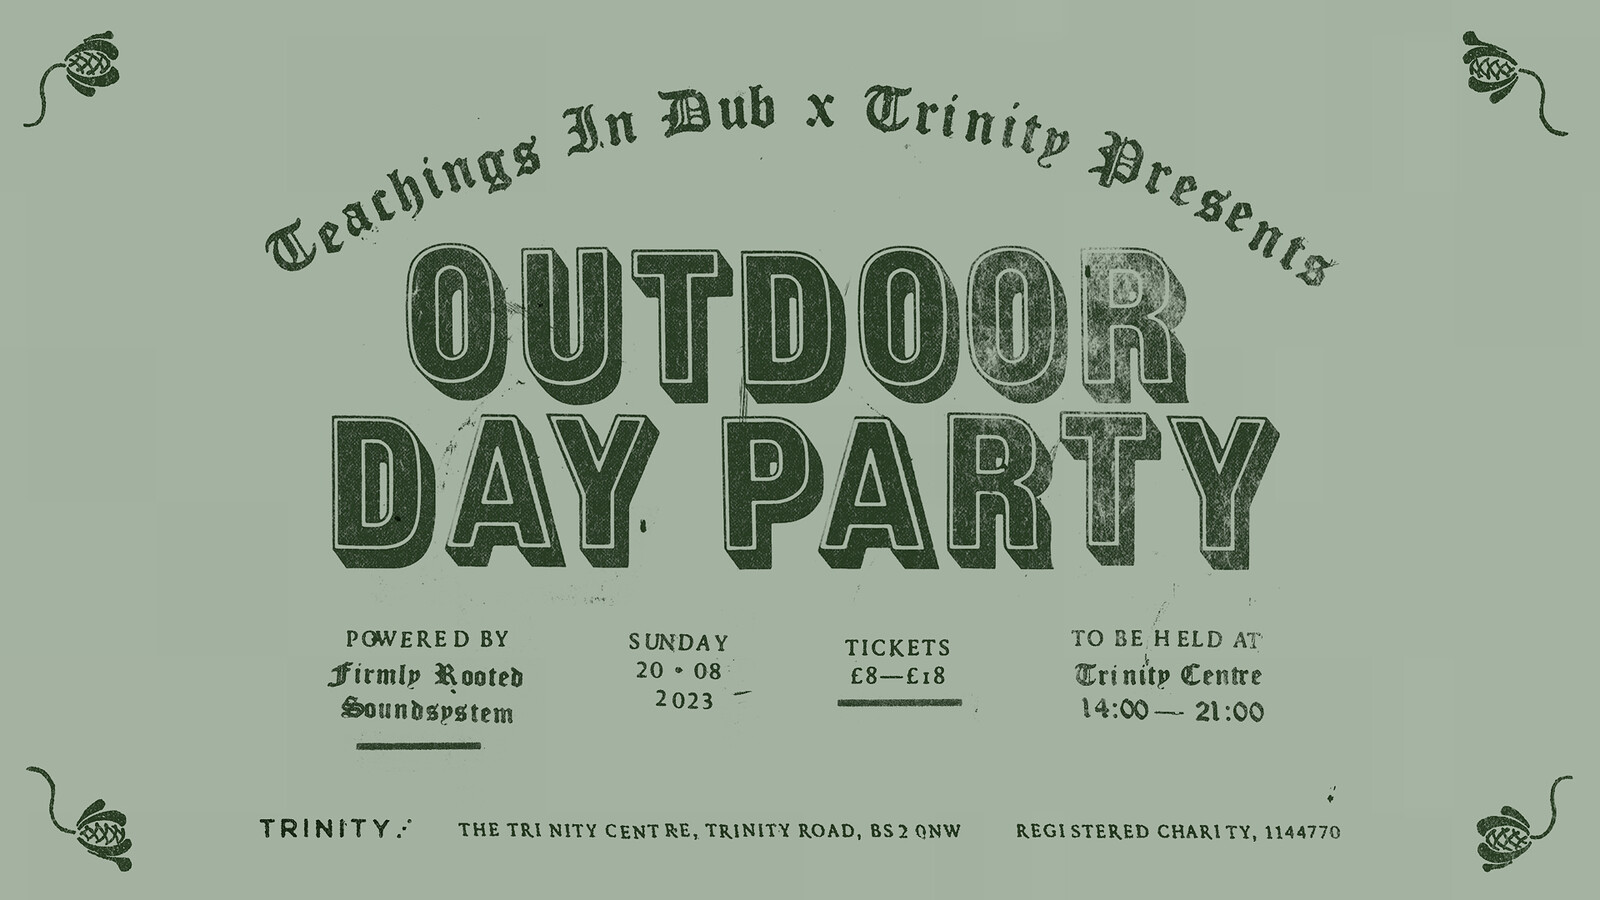 Teachings in Dub x Trinity Presents: Day Party at The Trinity Centre